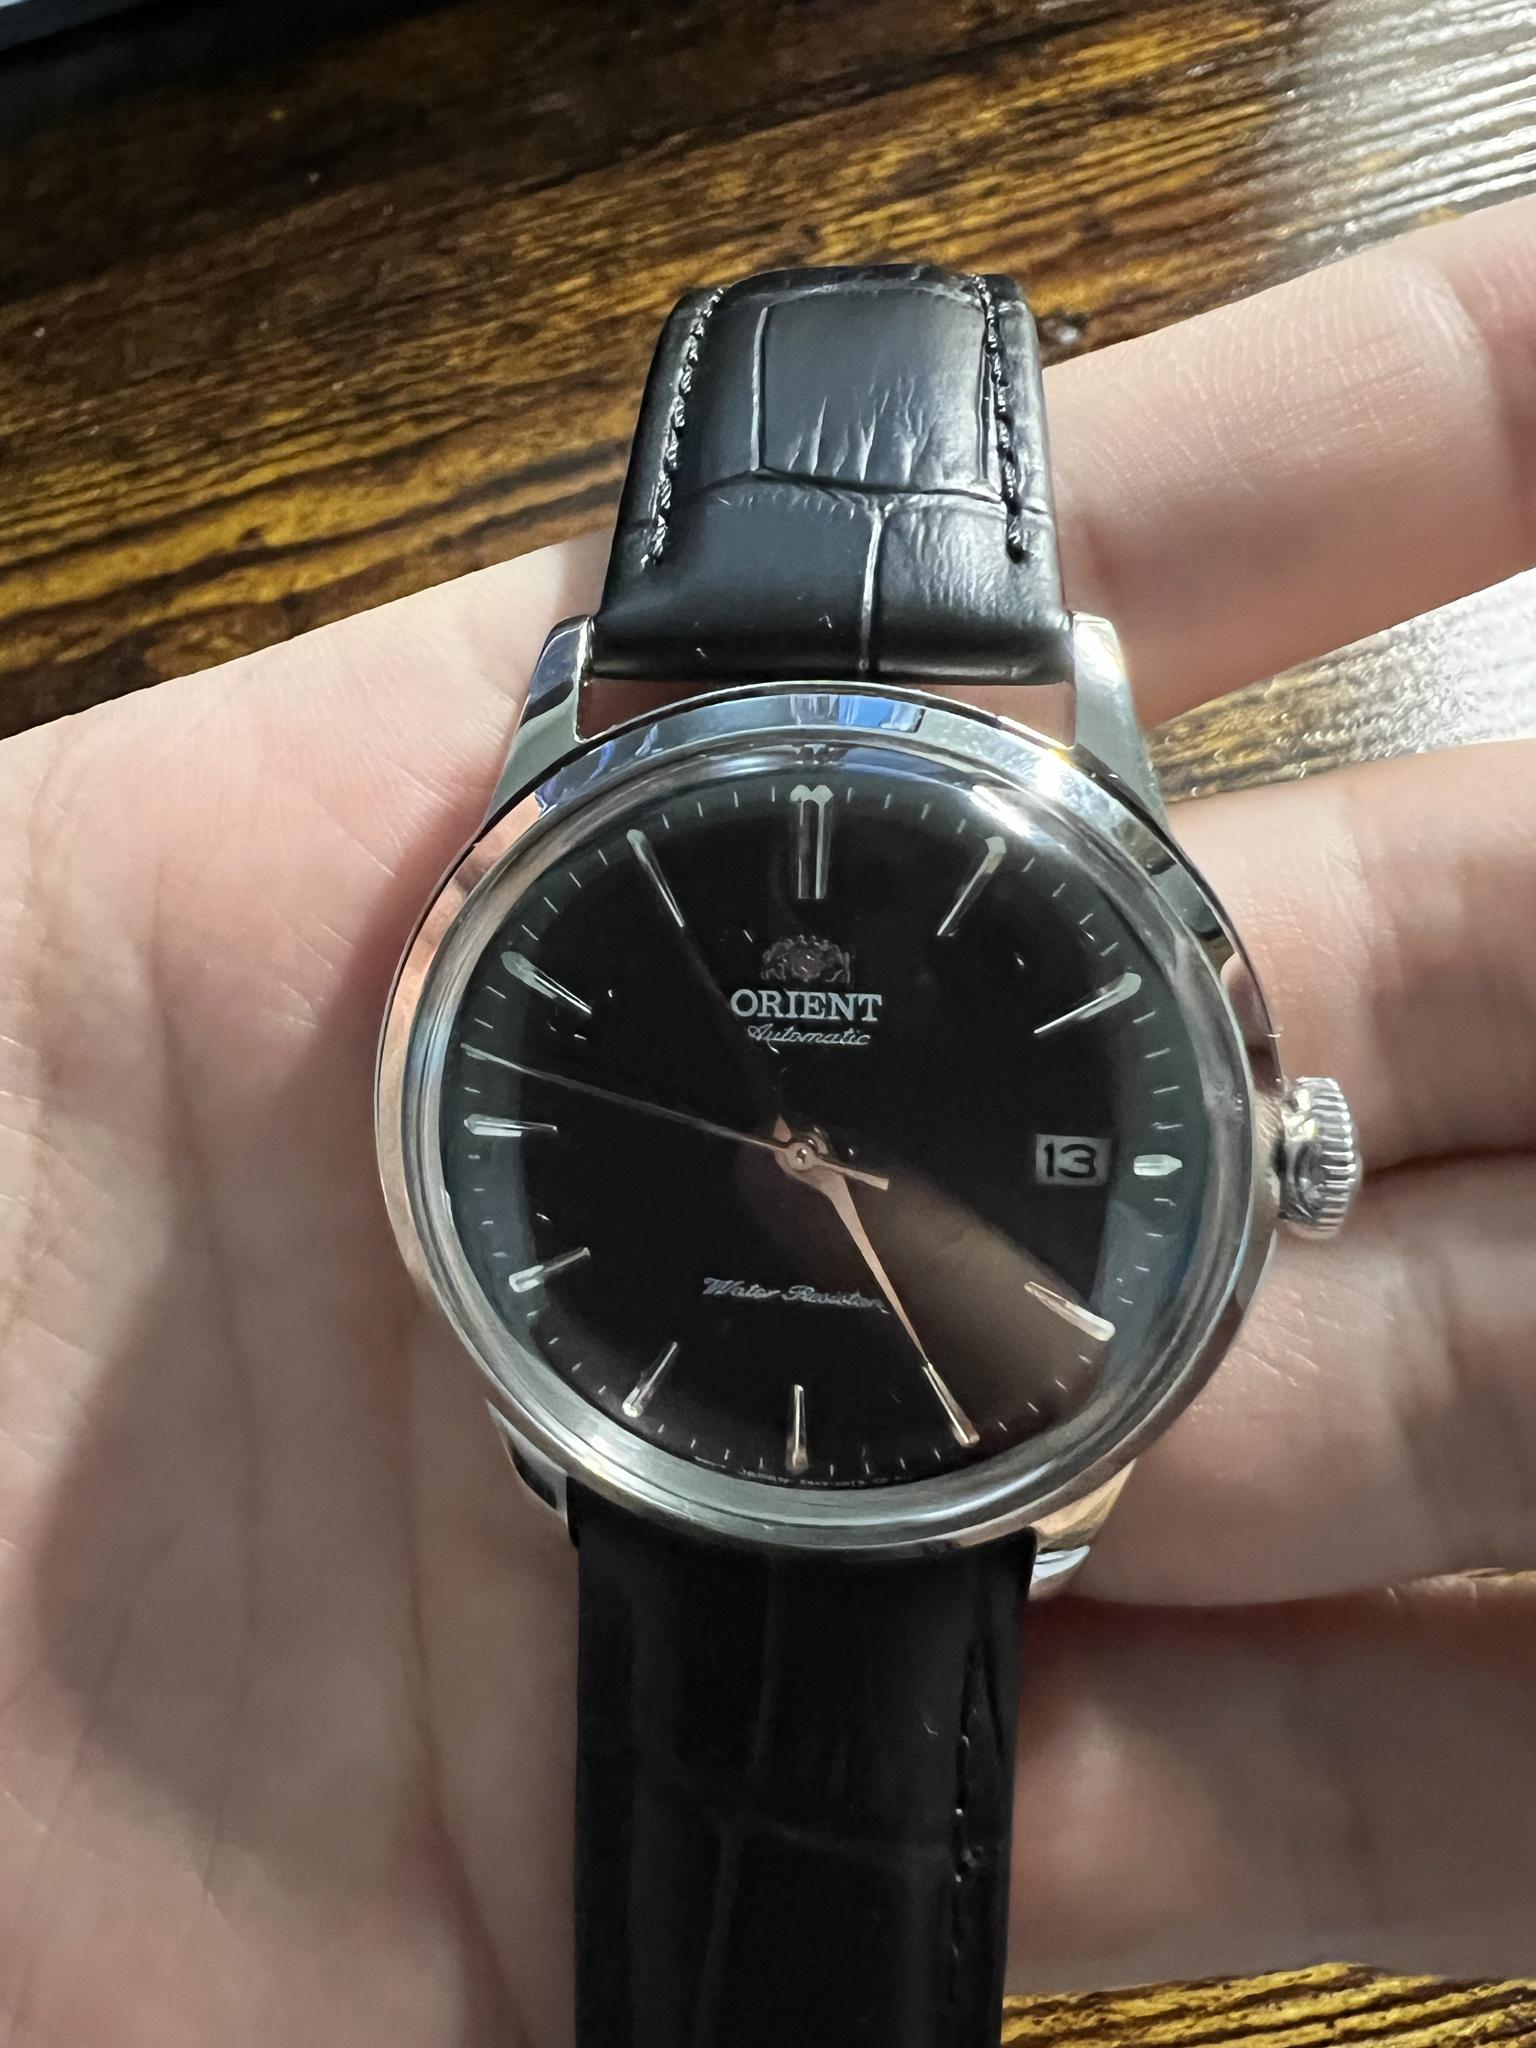 WTS] Orient Bambino Black 38mm, Casio a700 silver, Casio a1000 stainless  steel black